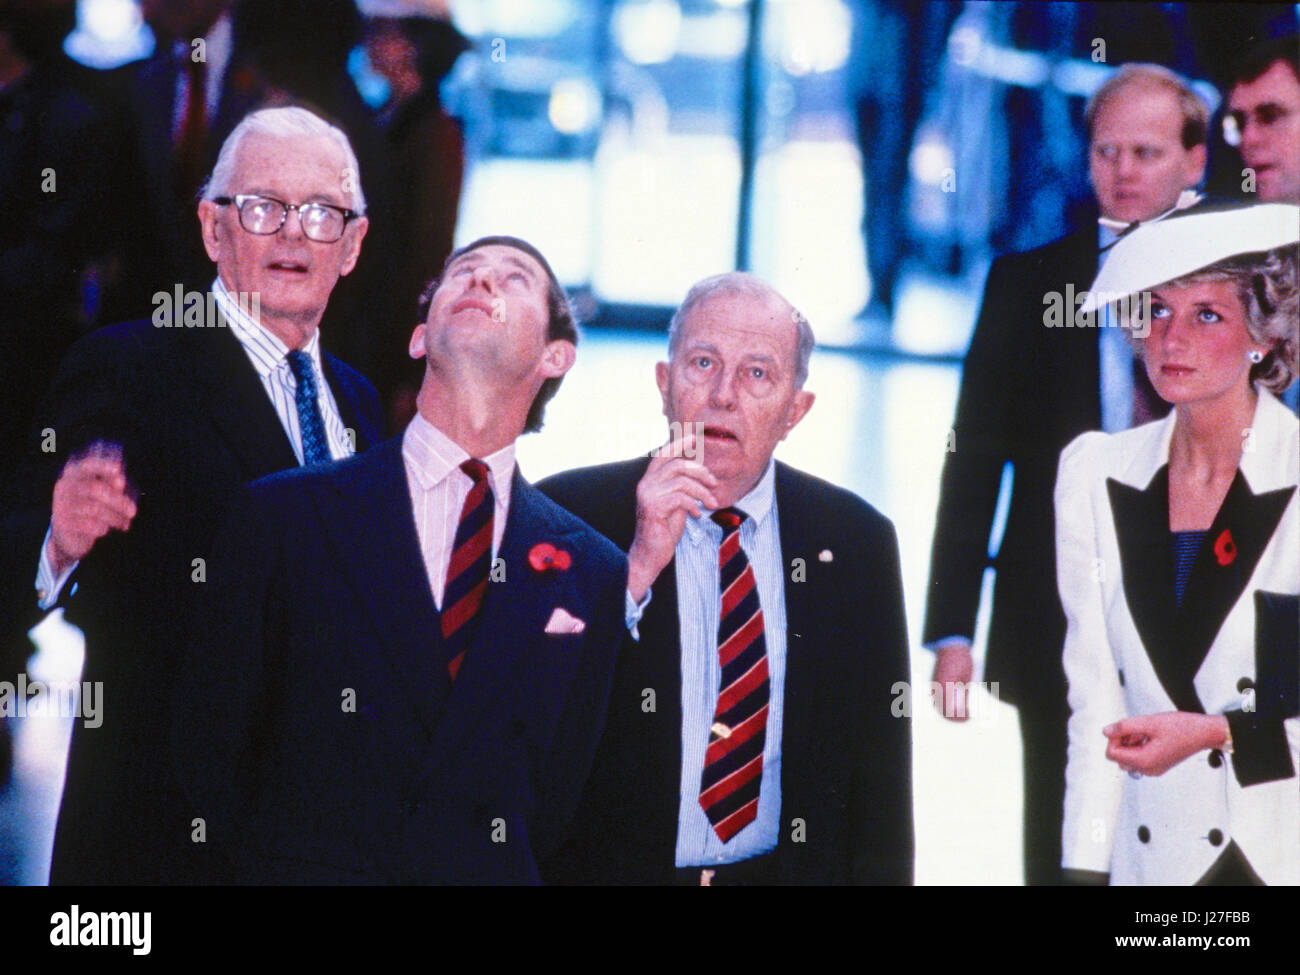 Prince Charles looks up at a hanging exhibit above the center of the gallery as the Royal couple tours the exhibit 'The Treasure Houses of Britain: 500 Years of Private Patronage and Art Collecting' at the National Gallery of Art in Washington, DC on November 11, 1985. From left to right: John Stevenson, President of the National Gallery of Art; Prince Charles; Dr. Franklin Murphy, Board Chairman of the National Gallery of Art; and Princess Diana. Credit: Peter Heimsath/Pool via CNP - NO WIRE SERVICE- Photo: Peter Heimsath/Consolidated News Photos/Peter Heimsath - Pool via CNP Stock Photo